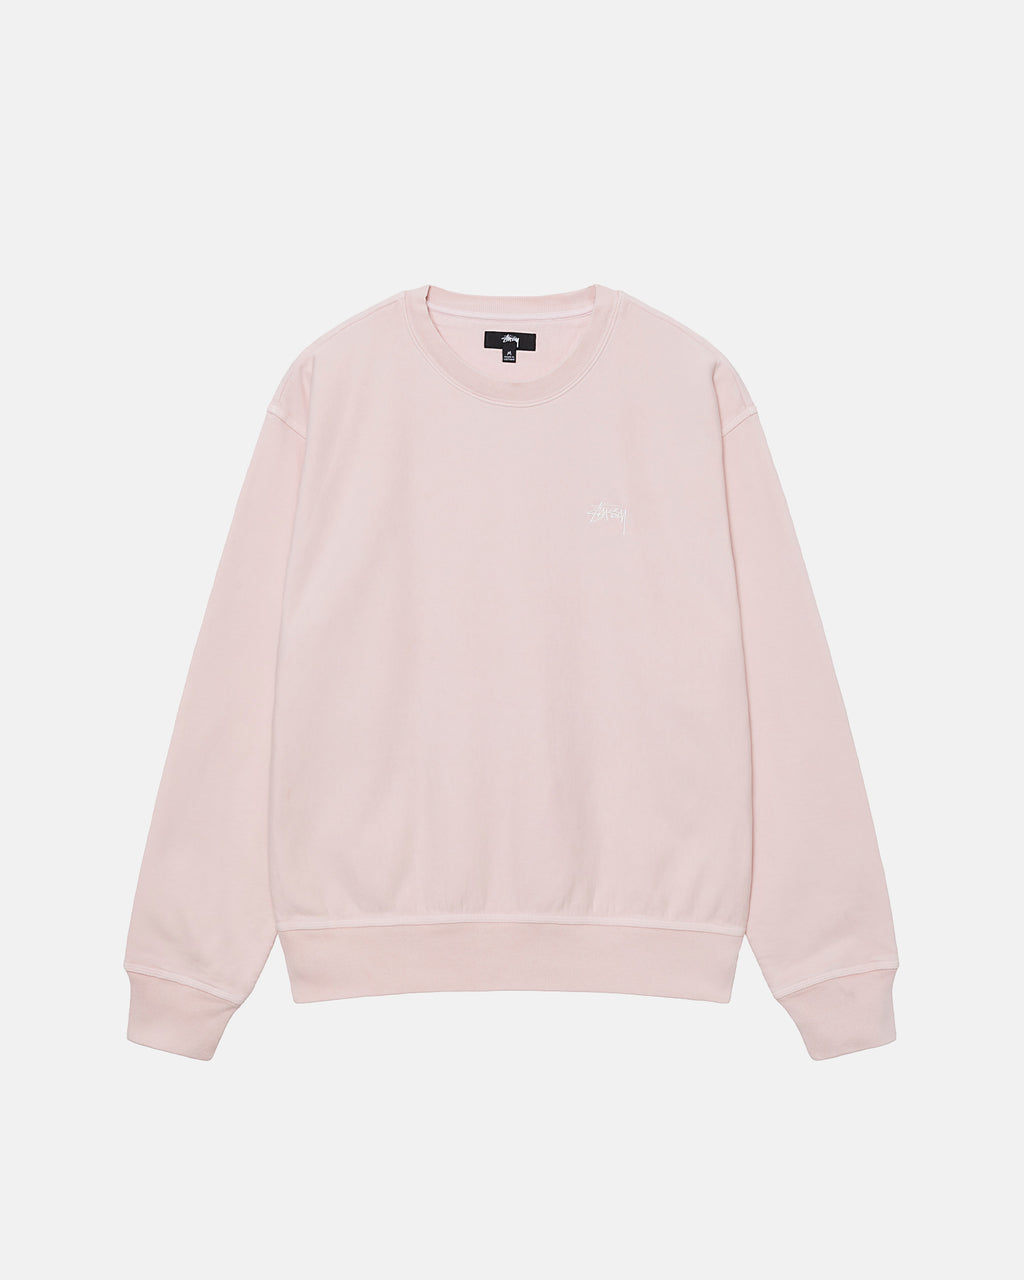 Overdyed: Dry Cotton, Overdyed Fleece and Tees by Stüssy